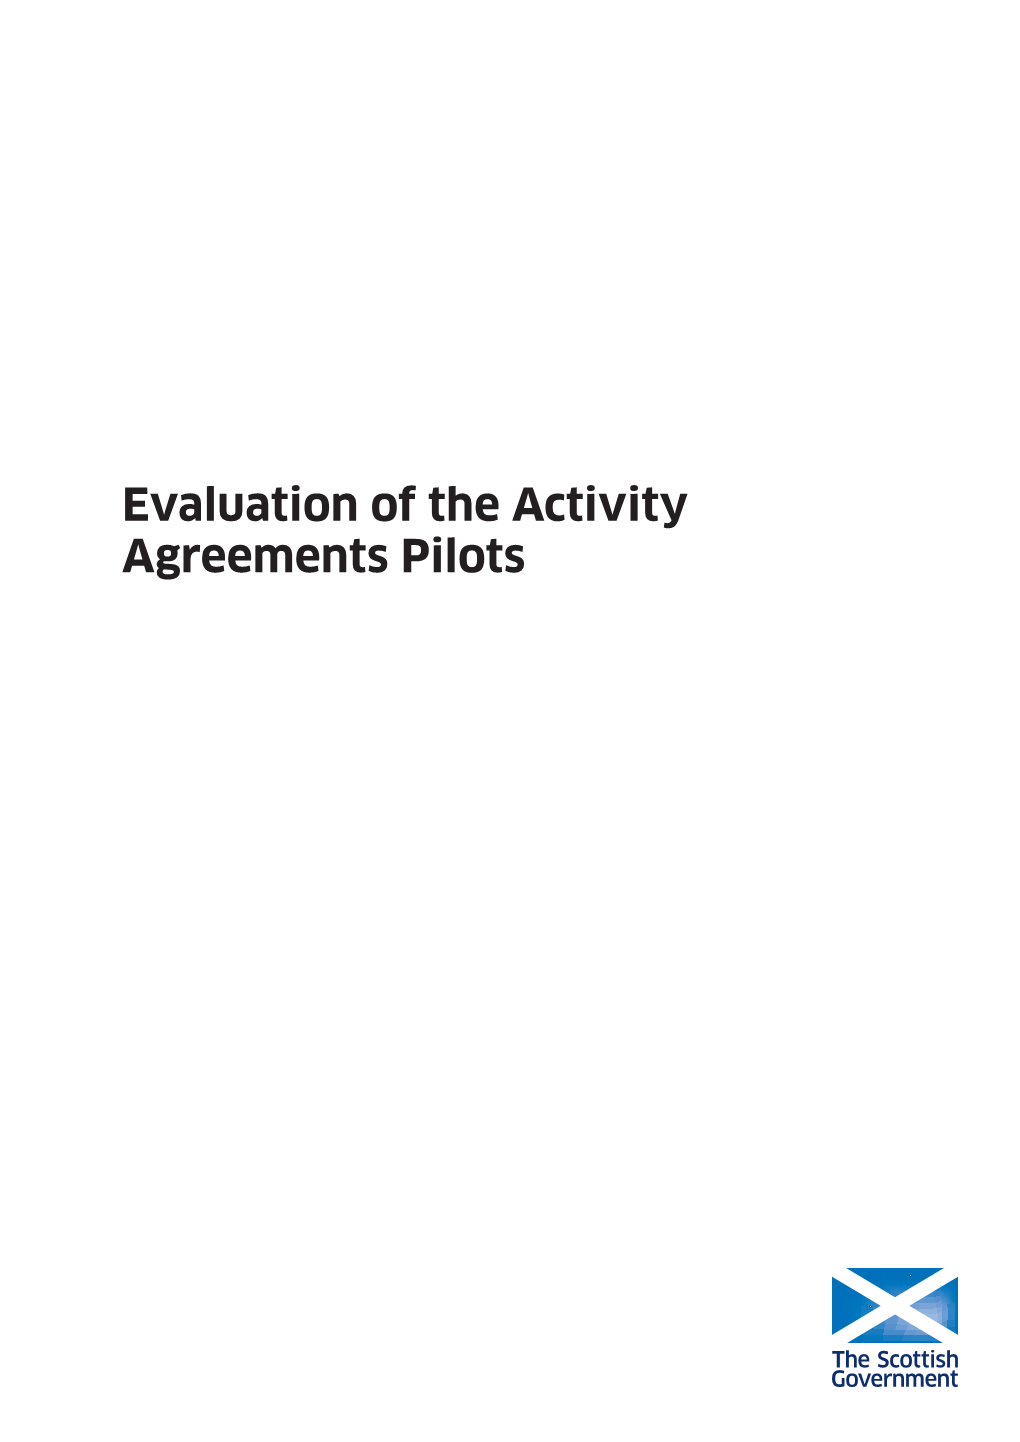 Evaluation of the Activity Agreements Pilots EVALUATION of the ACTIVITY AGREEMENTS PILOTS